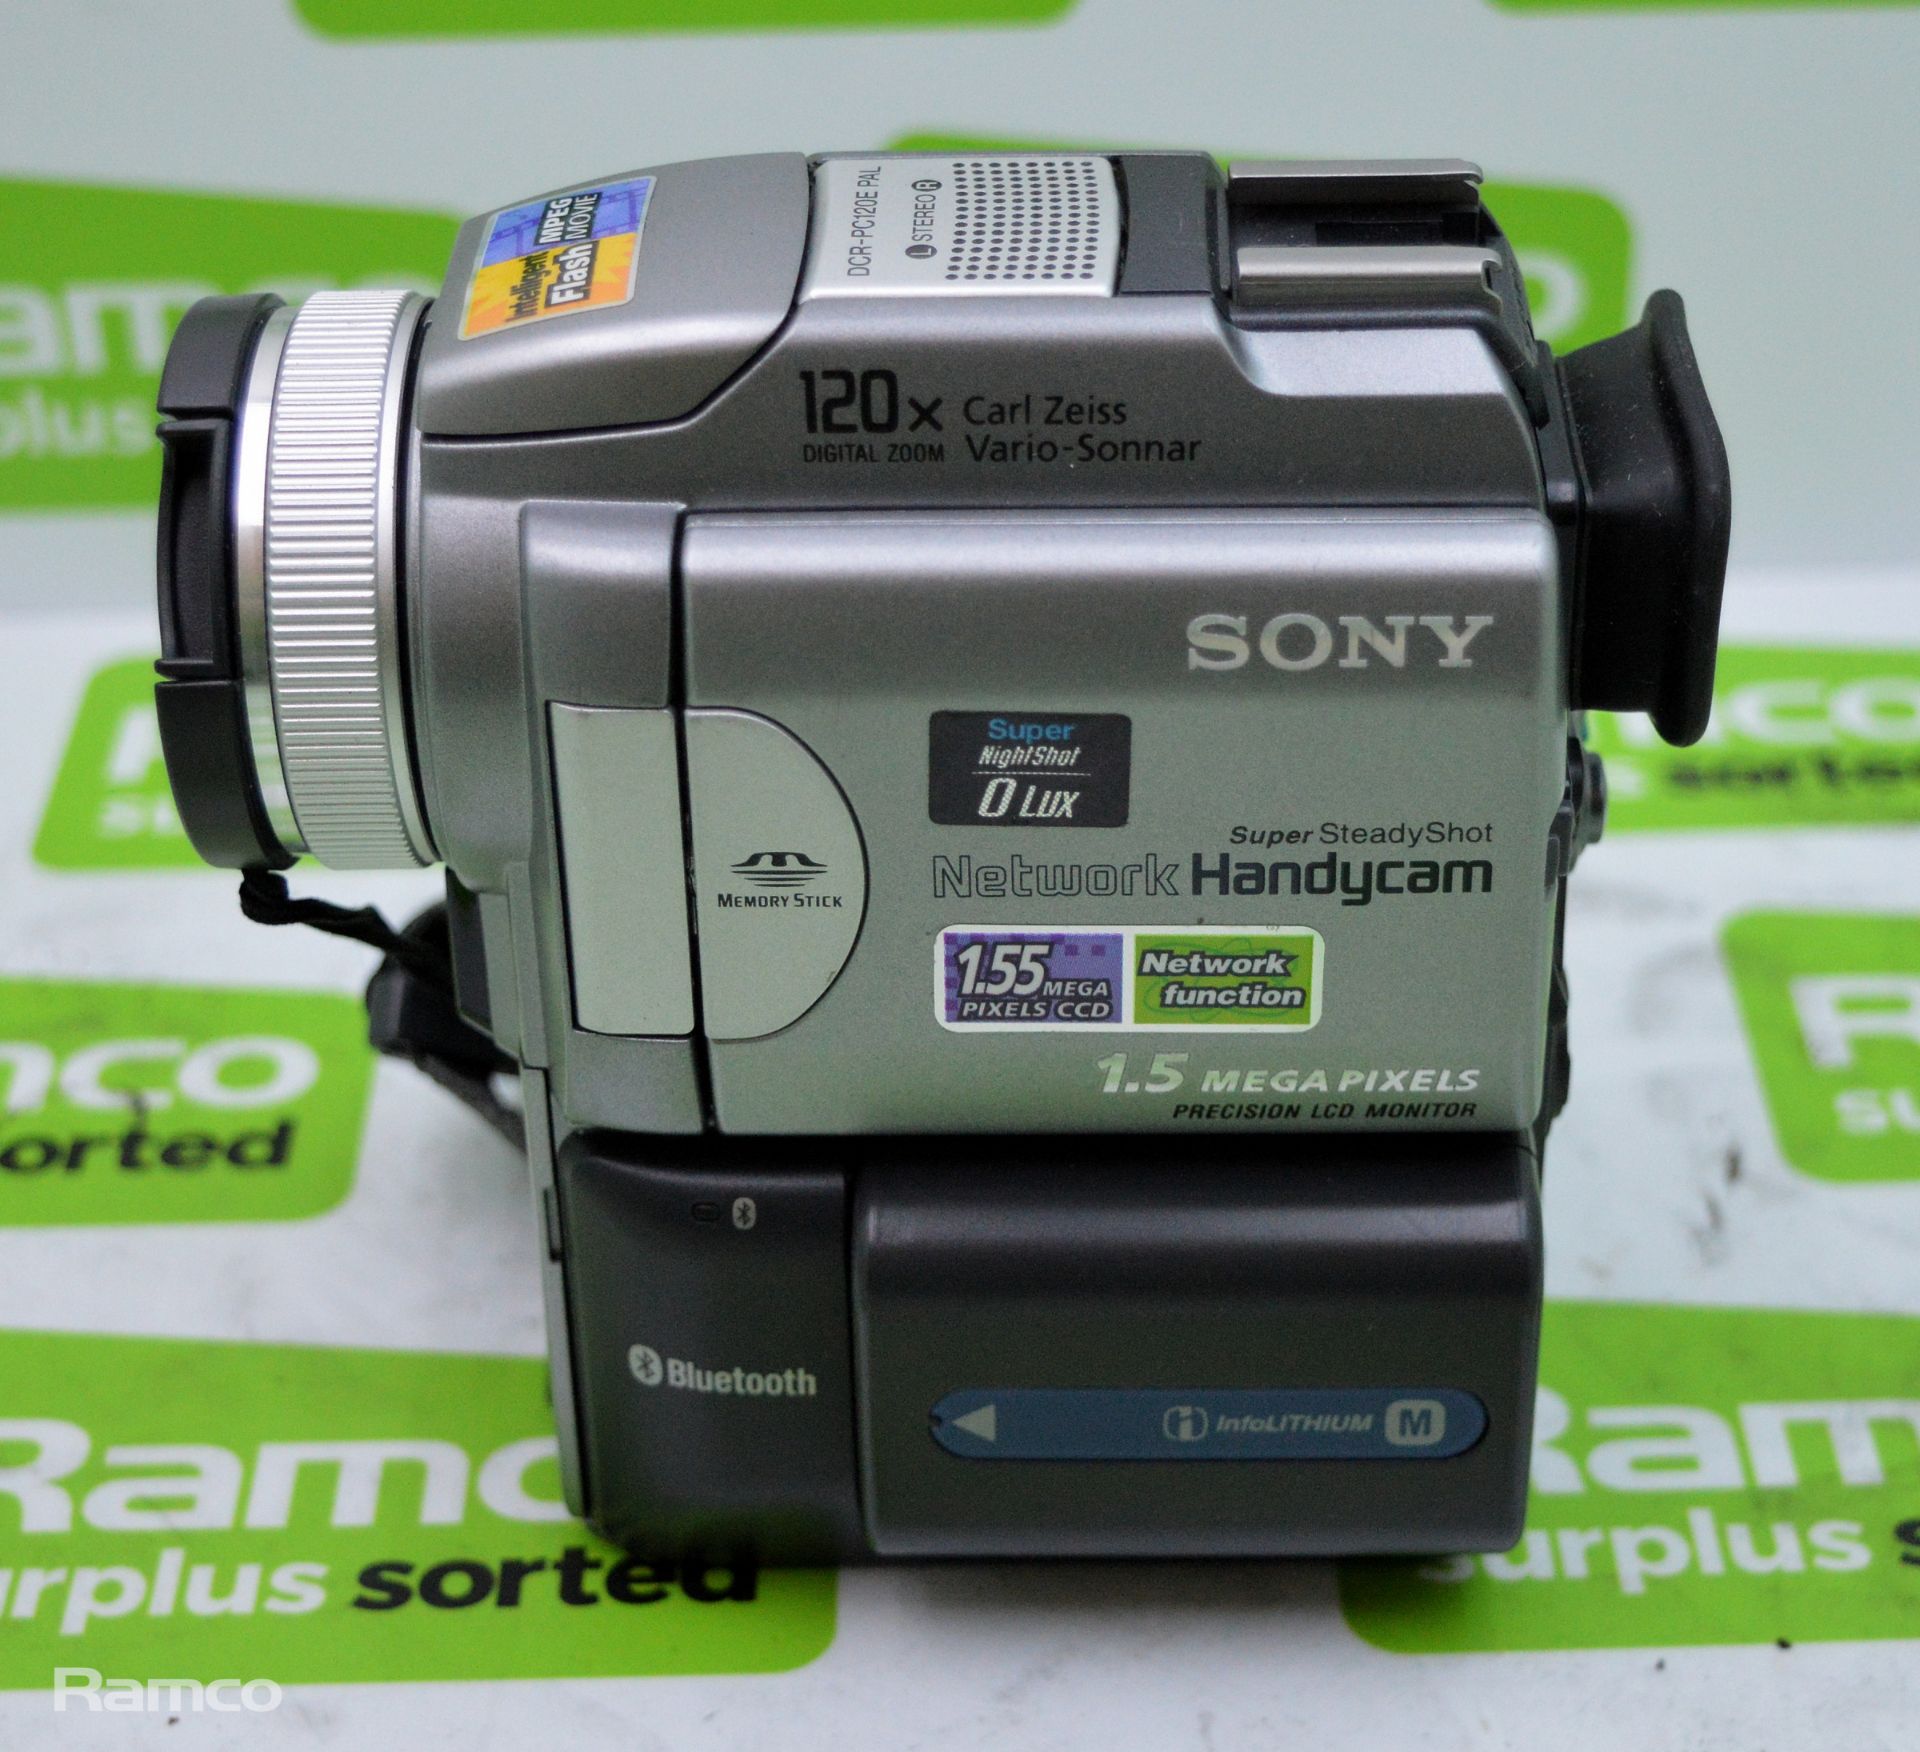 Sony DCR-PC120E Video Camcorder With Accessories In Case - Image 2 of 6